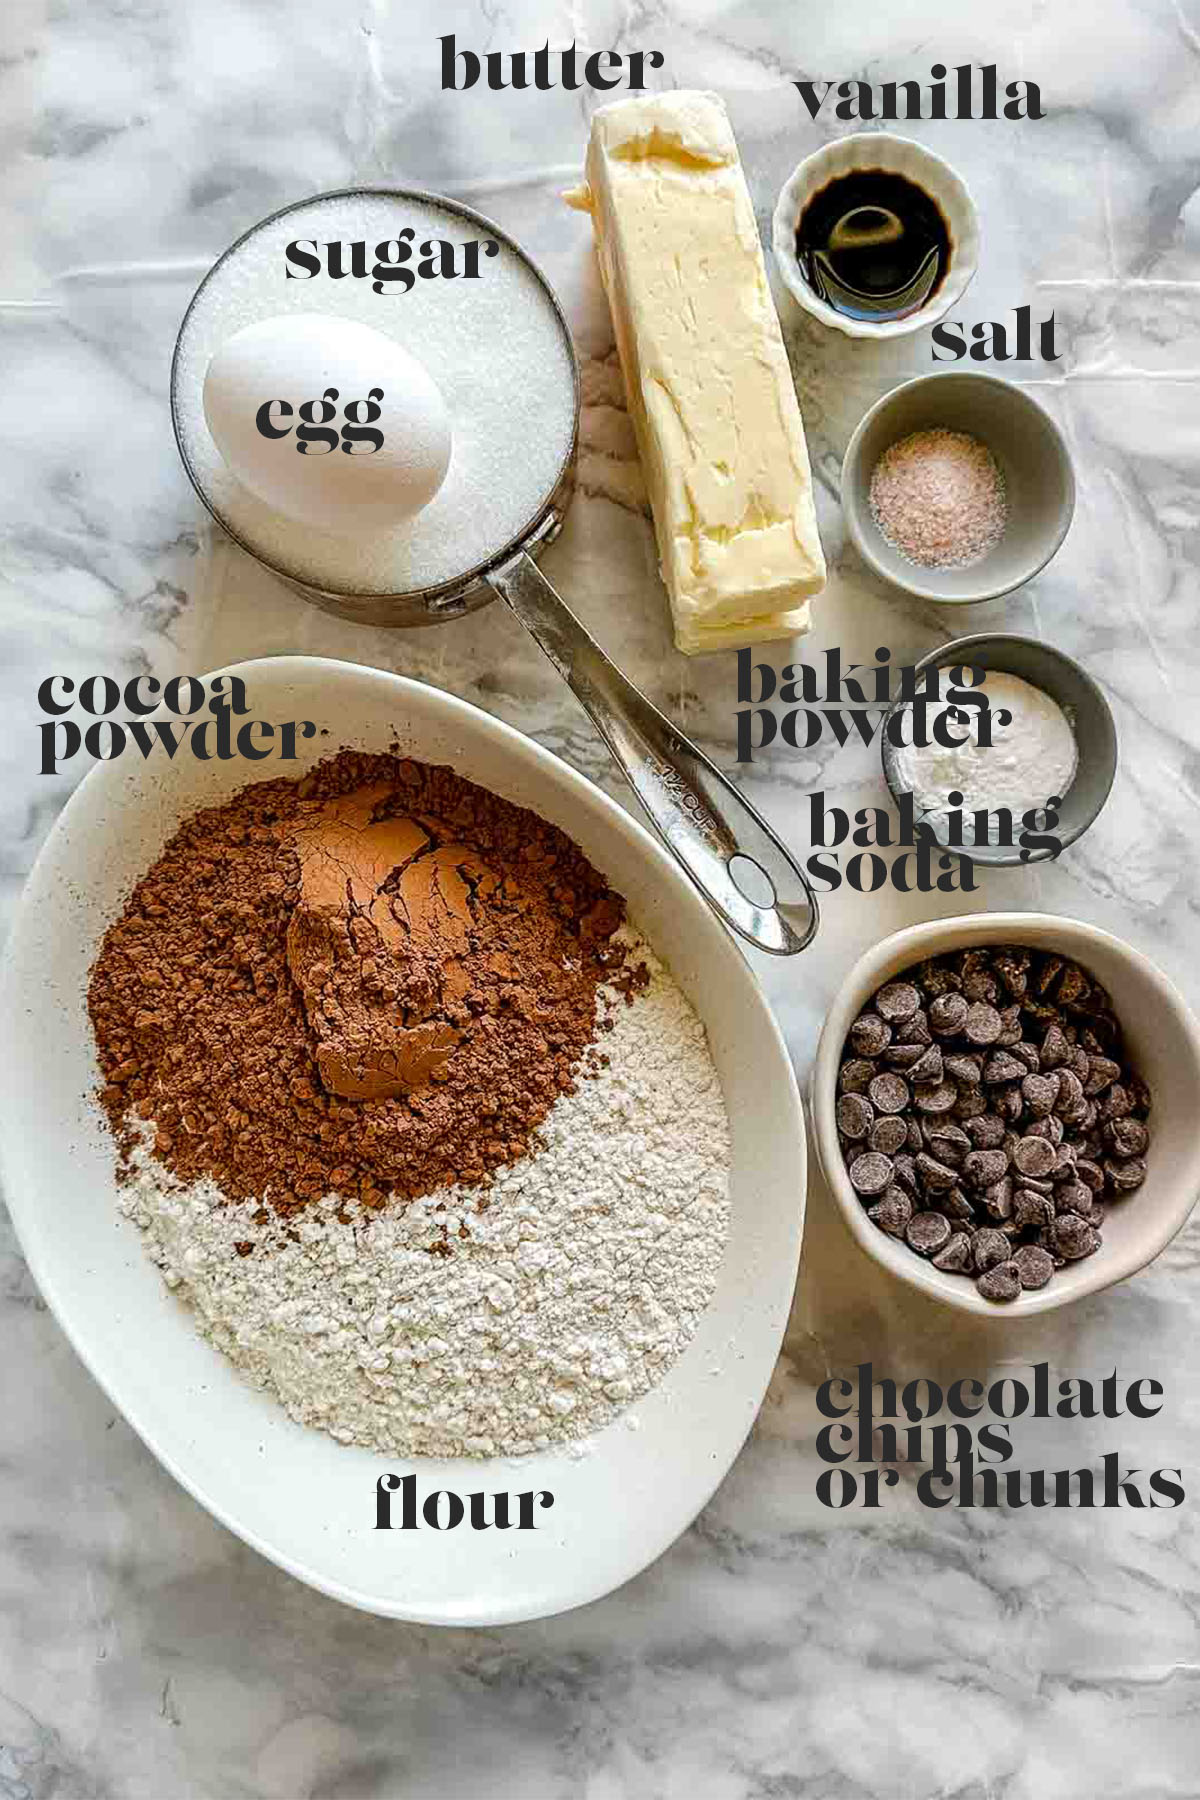 Labeled ingredients for Nutella stuffed cookies sit on a white marble counter.